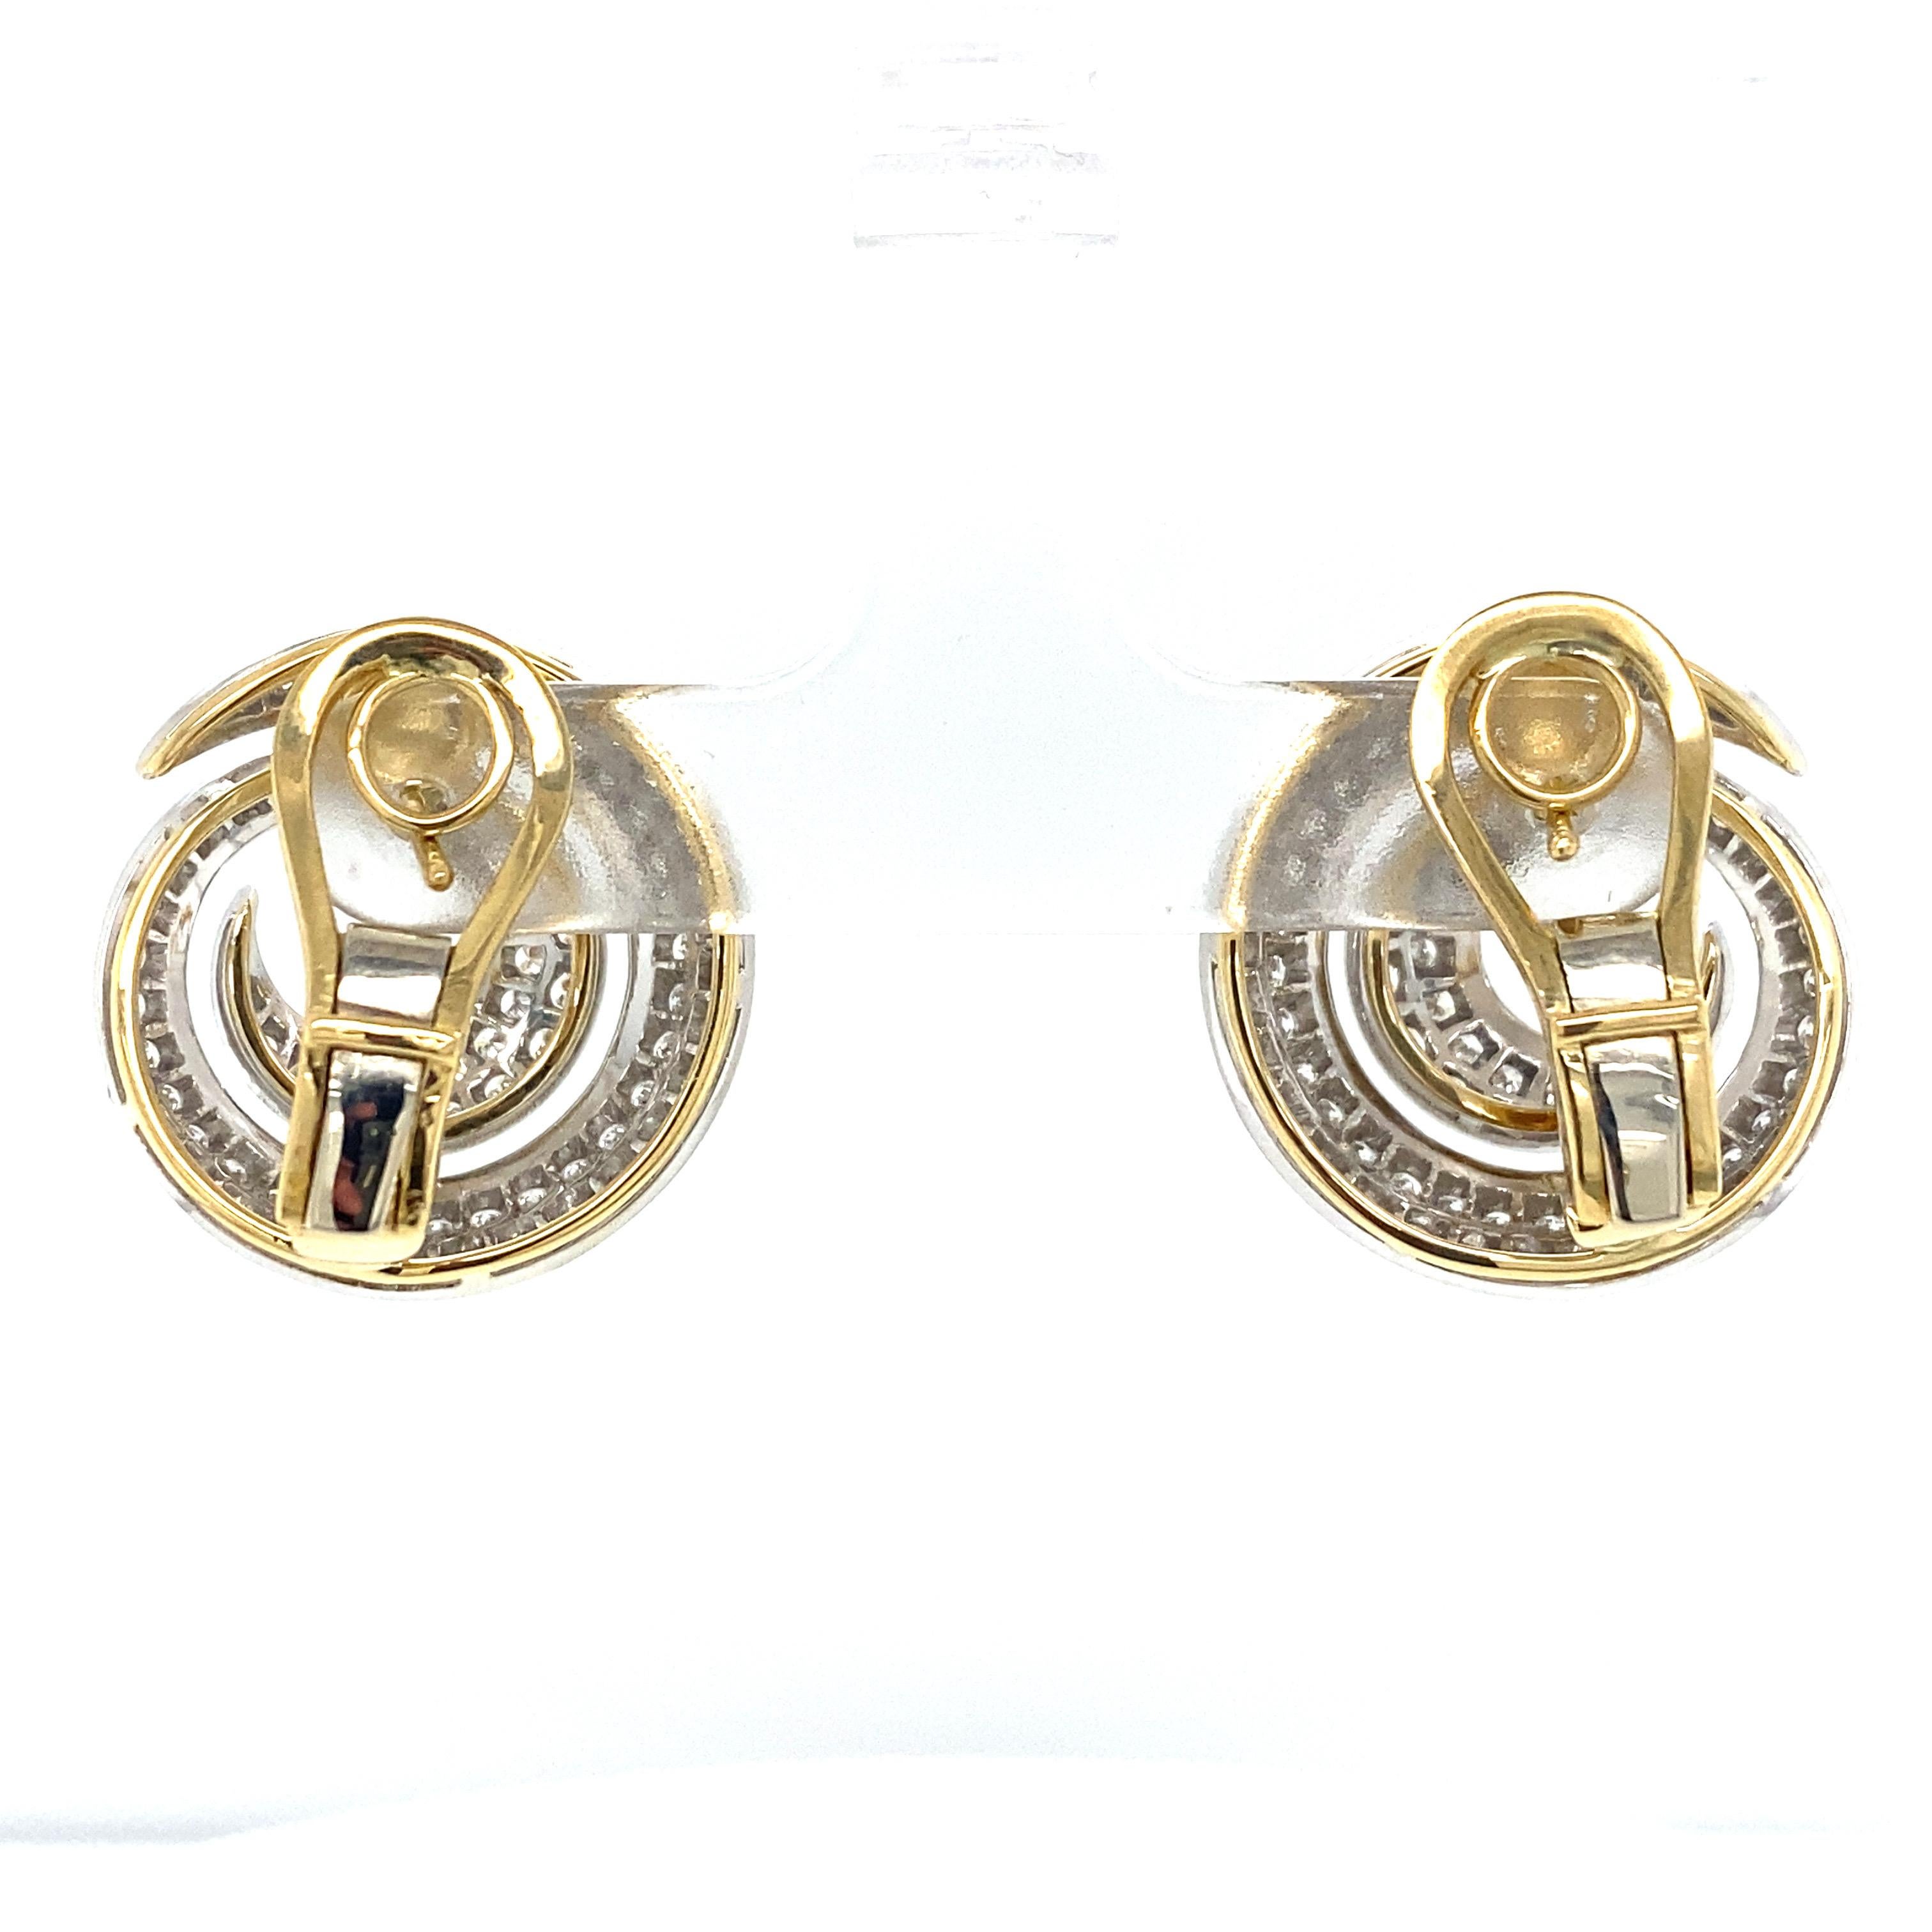 18k Yellow Gold and Platinum Handmade Diamond Swirl Button Earrings For Sale 1